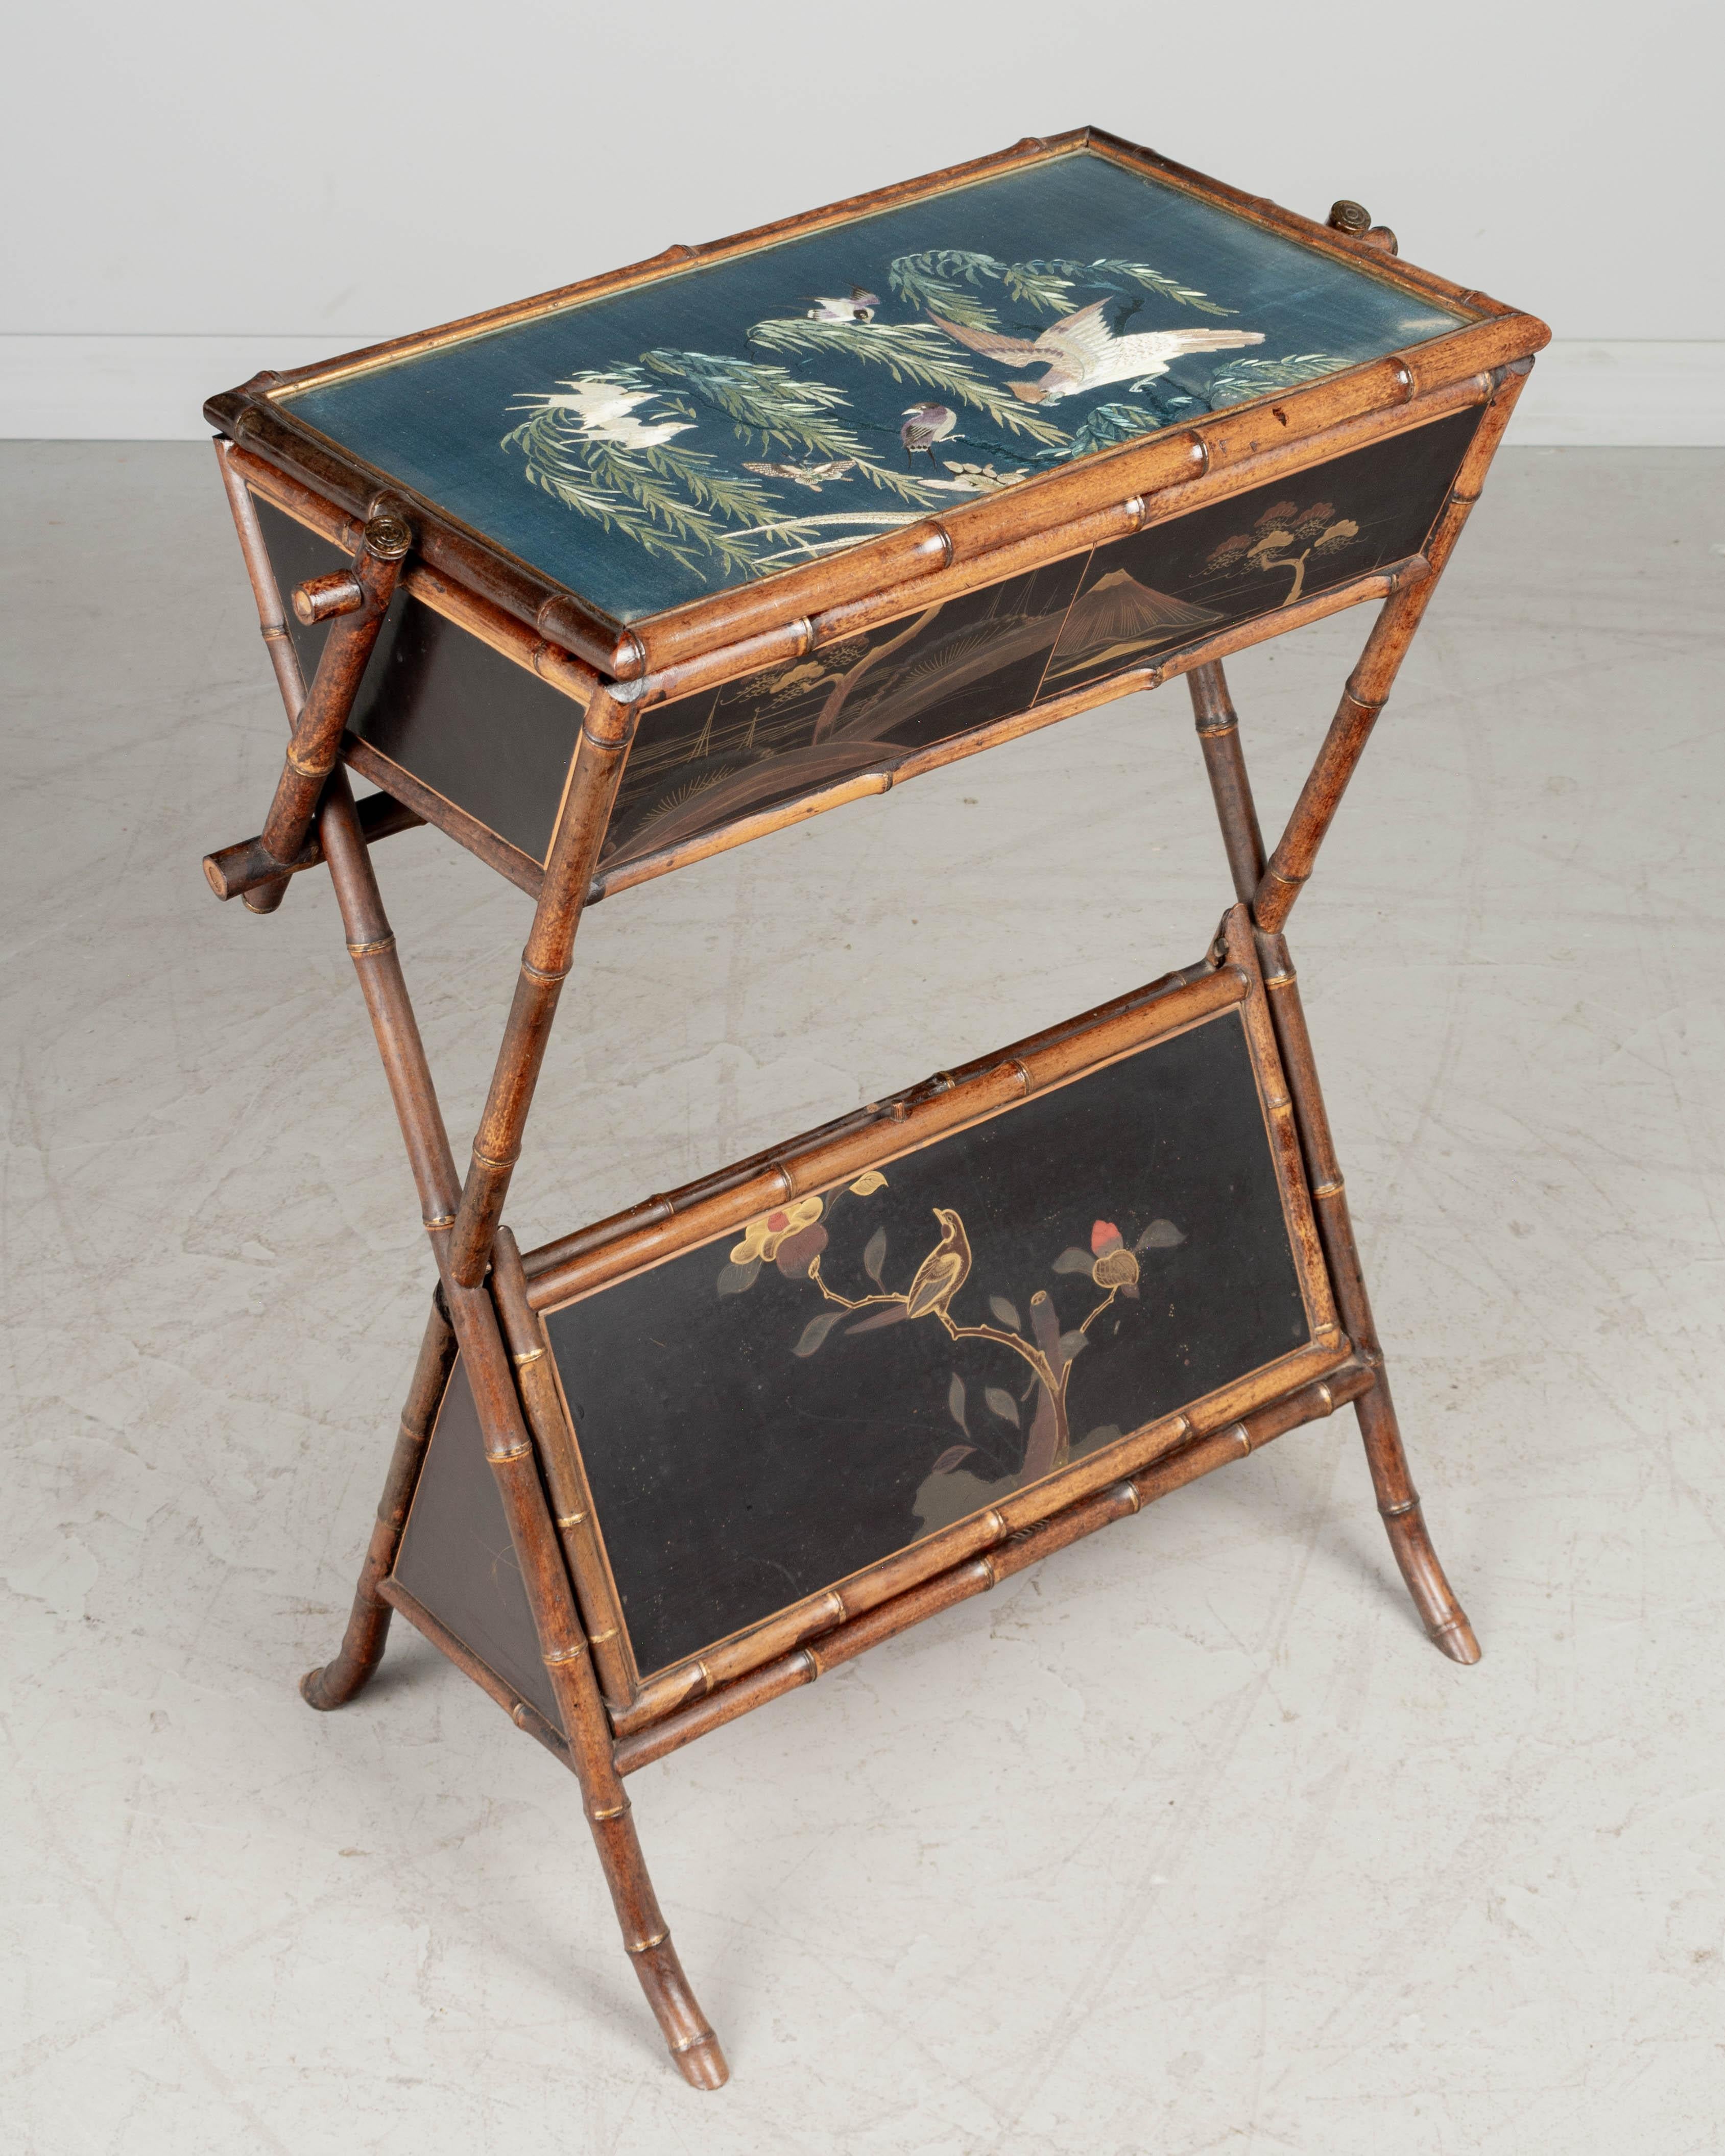 A 19th century French Japonisme Aesthetic Movement sewing table with bamboo frame and decorative black lacquer panels with red and gold cranes. Hinged top has a beautiful embroidered silk panel protected under glass a surface and opens to a mirrored